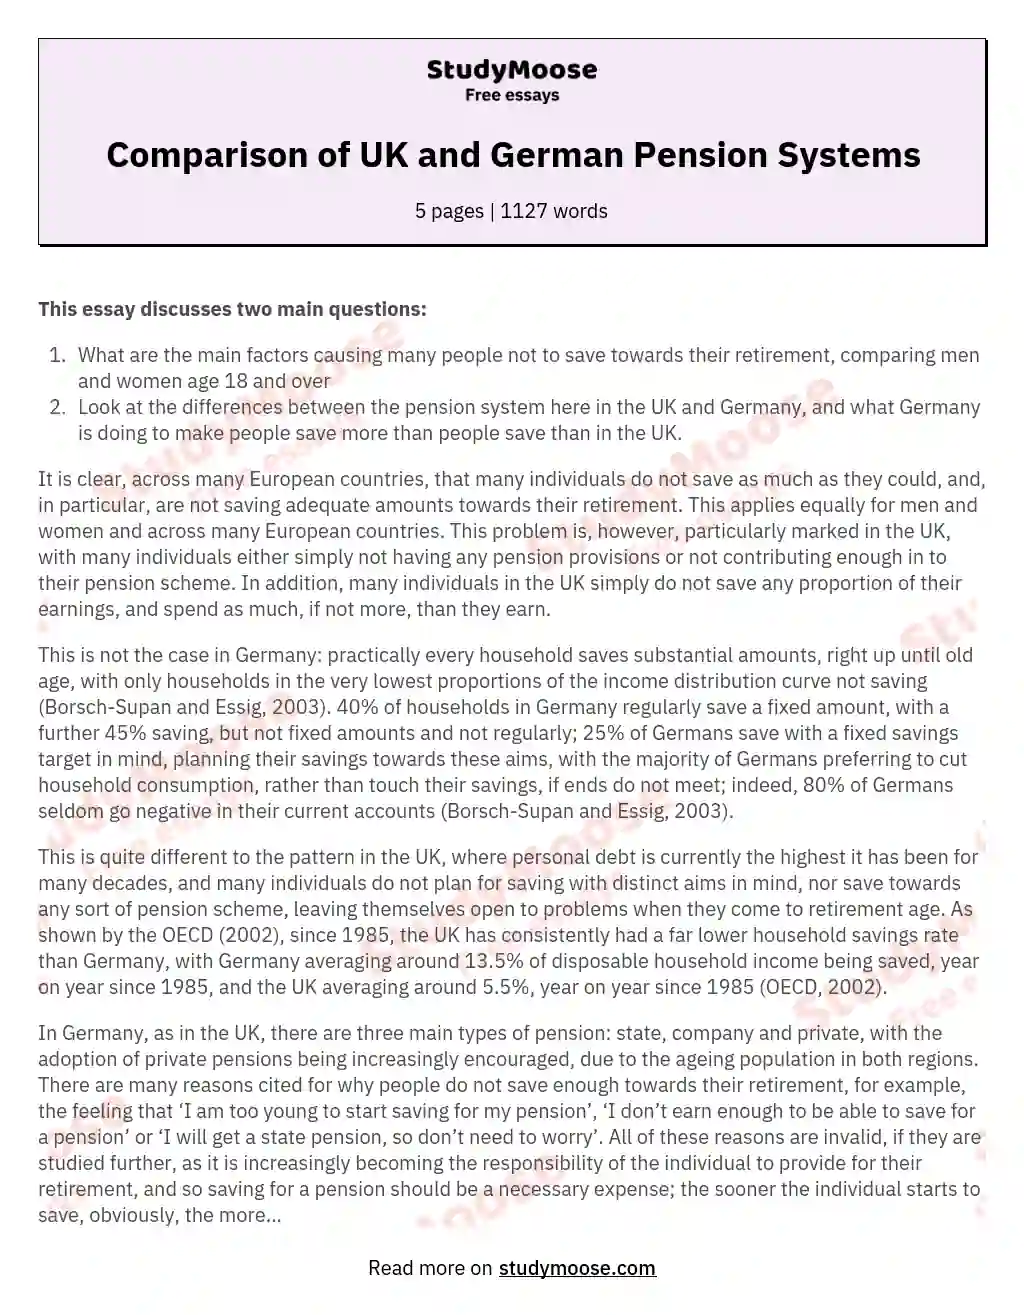 Comparison of UK and German Pension Systems essay